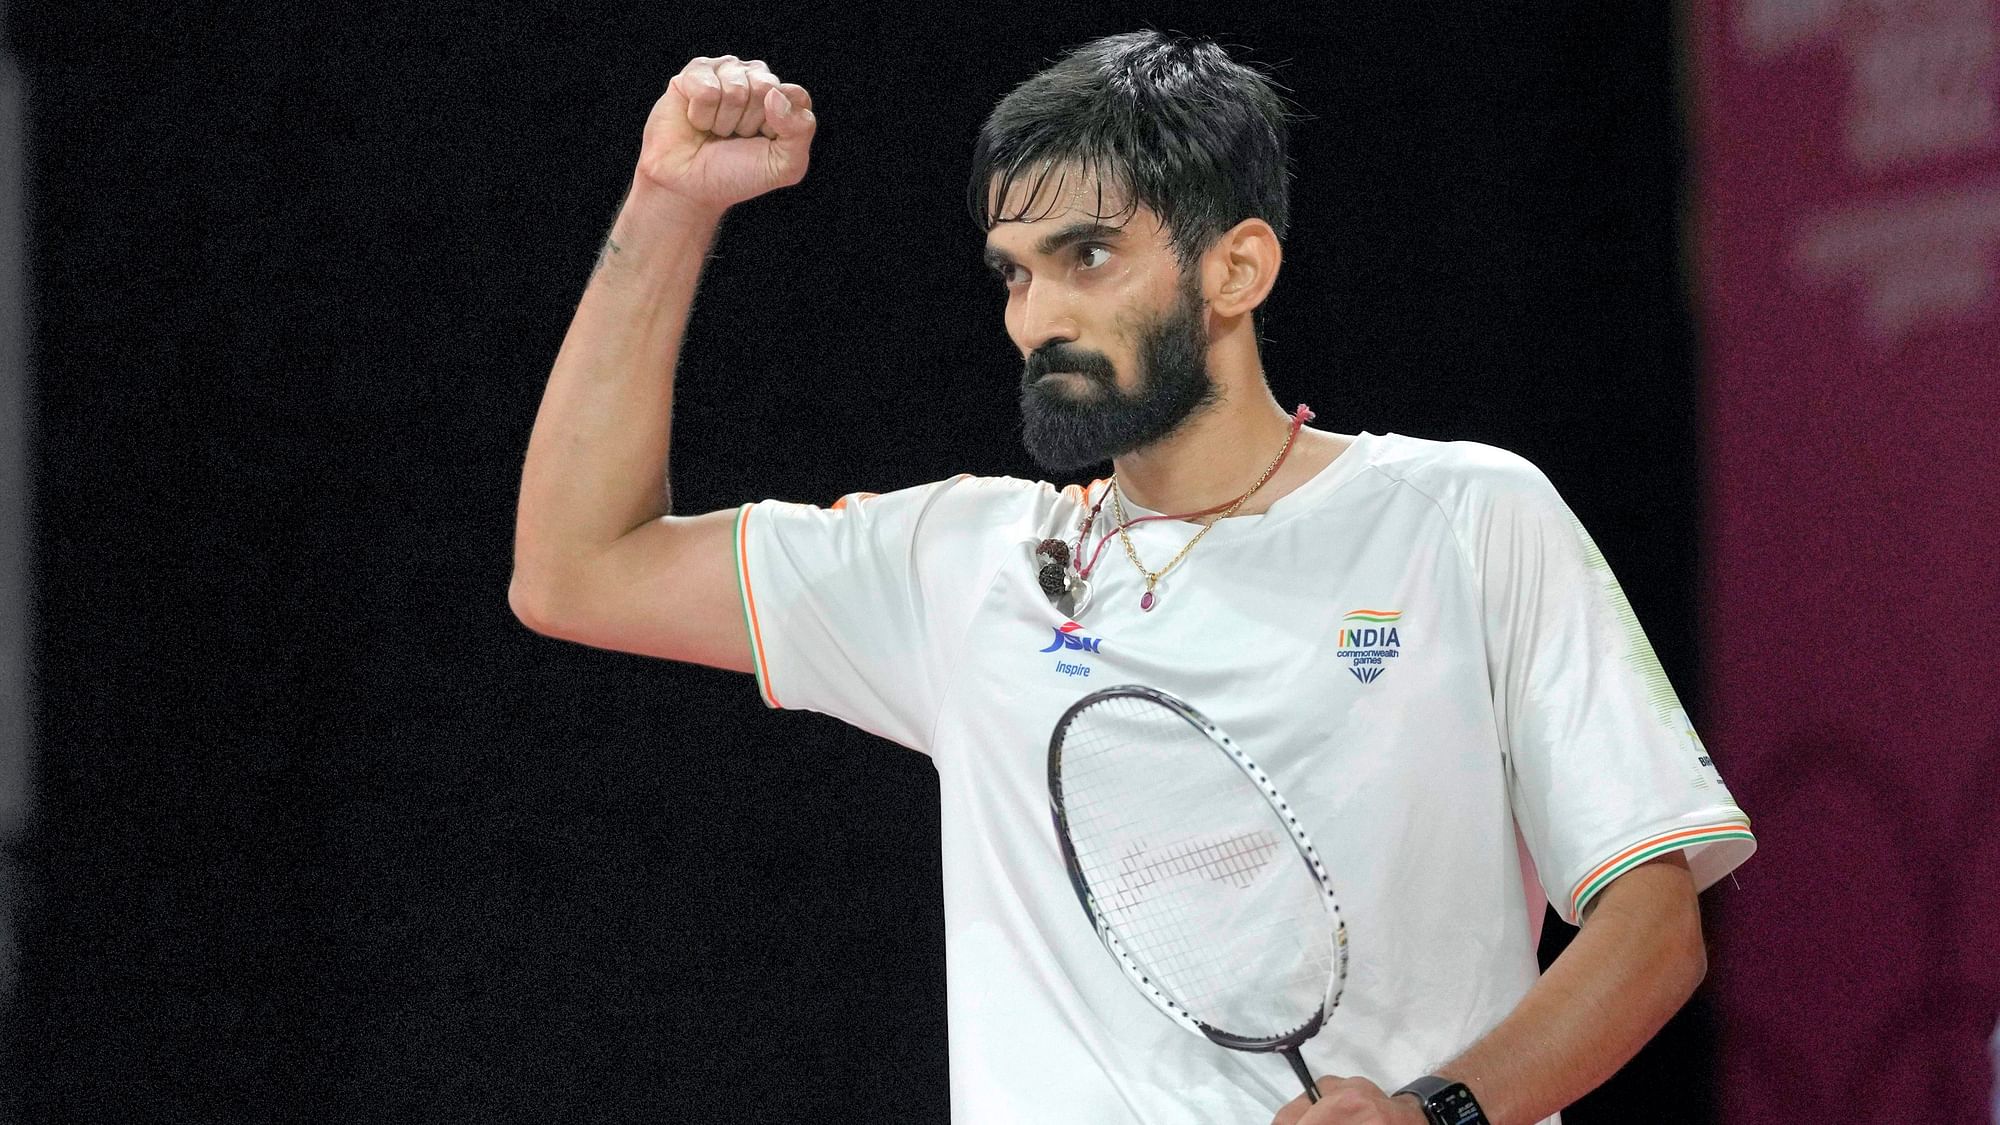 <div class="paragraphs"><p>India's Kidambi Srikanth celebrates after winning the bronze medal match in men's singles badminton&nbsp;at the 2022 Commonwealth Games in Birmingham.&nbsp;</p></div>